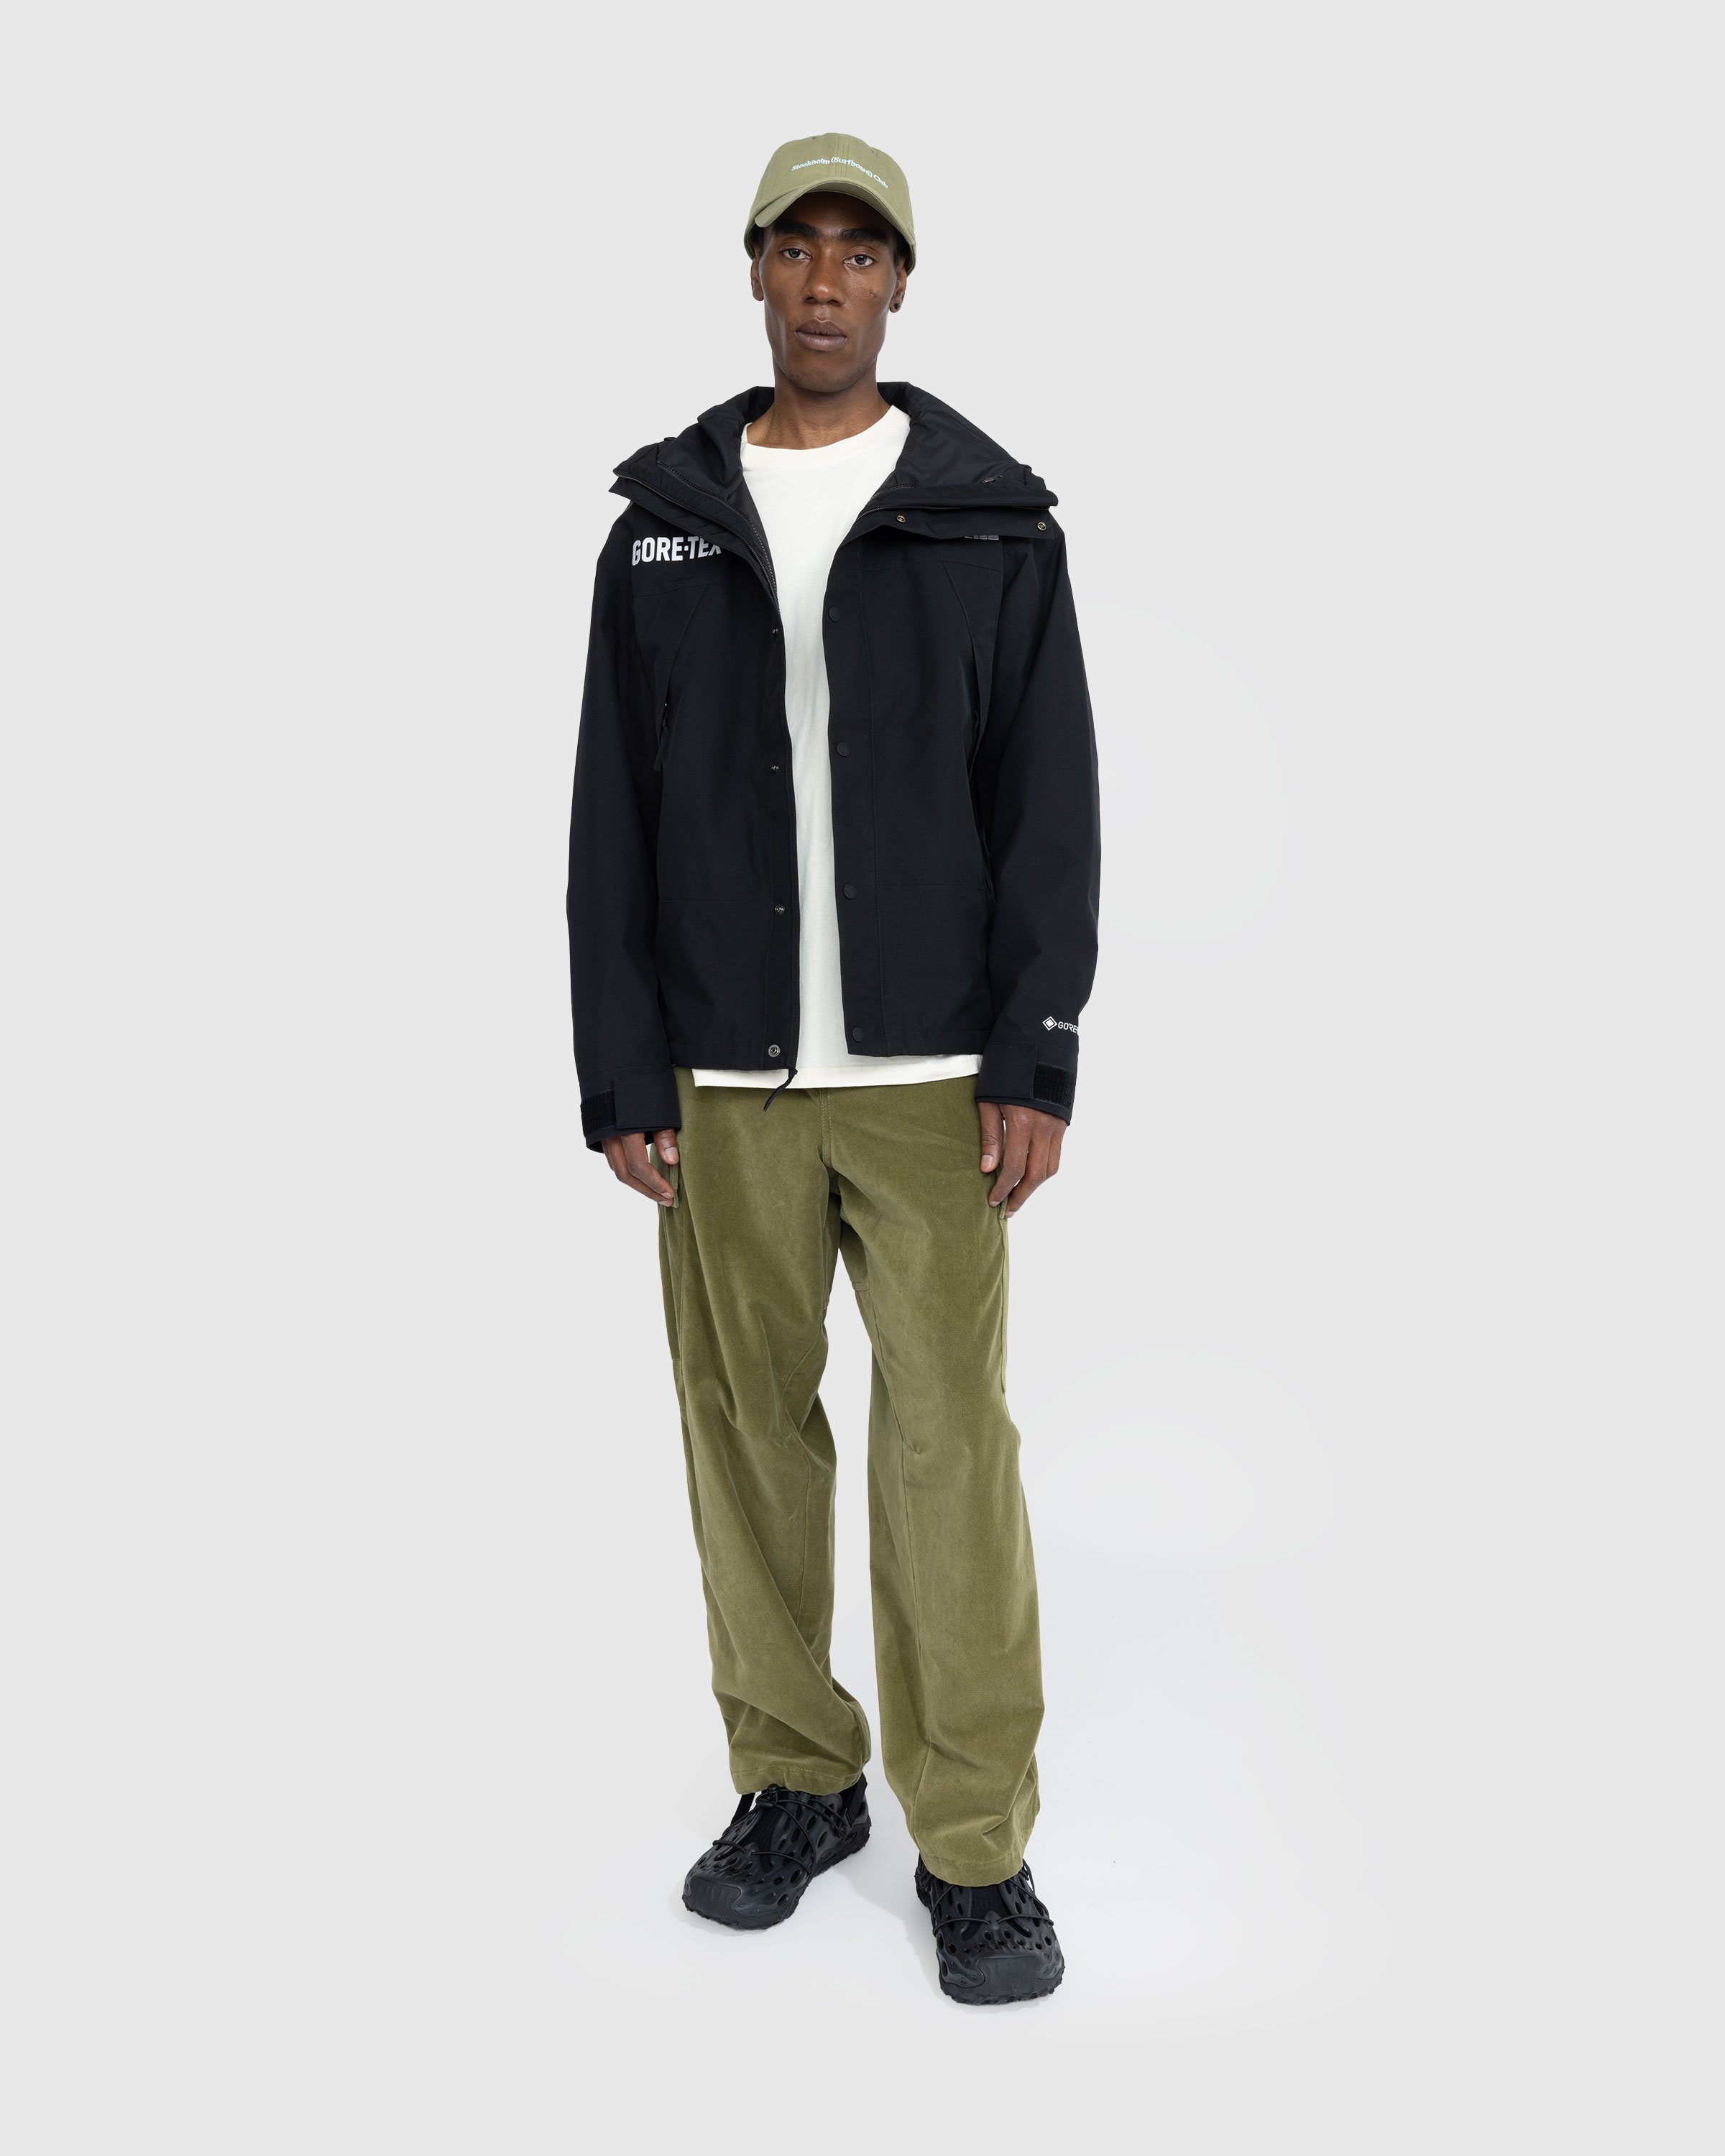 The North Face - Gore-Tex Mountain Jacket Black - Clothing - Black - Image 3